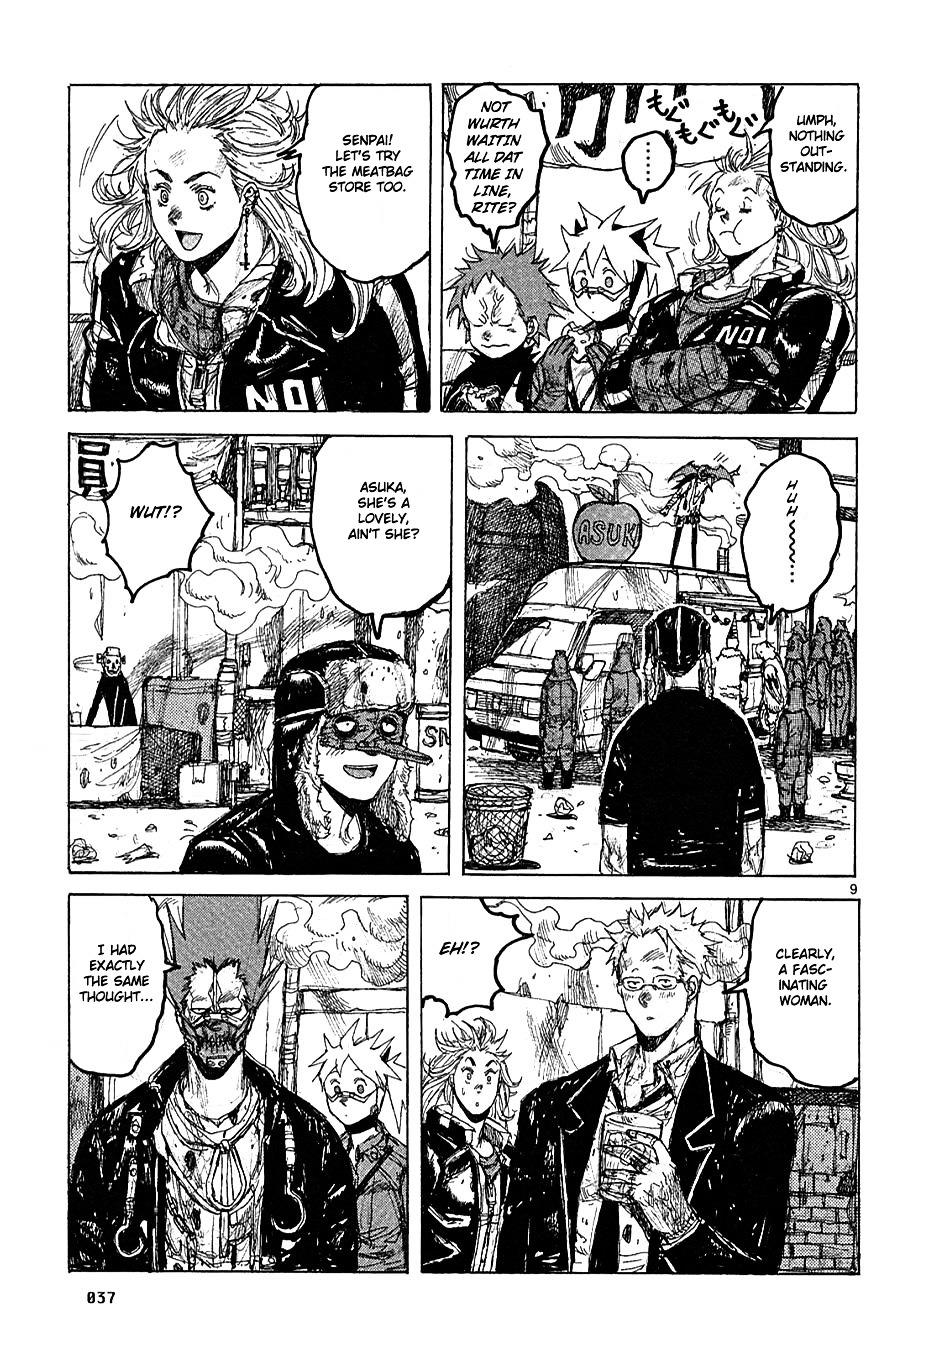 Dorohedoro Chapter 38 : Meatbags Free For All page 9 - Mangakakalot